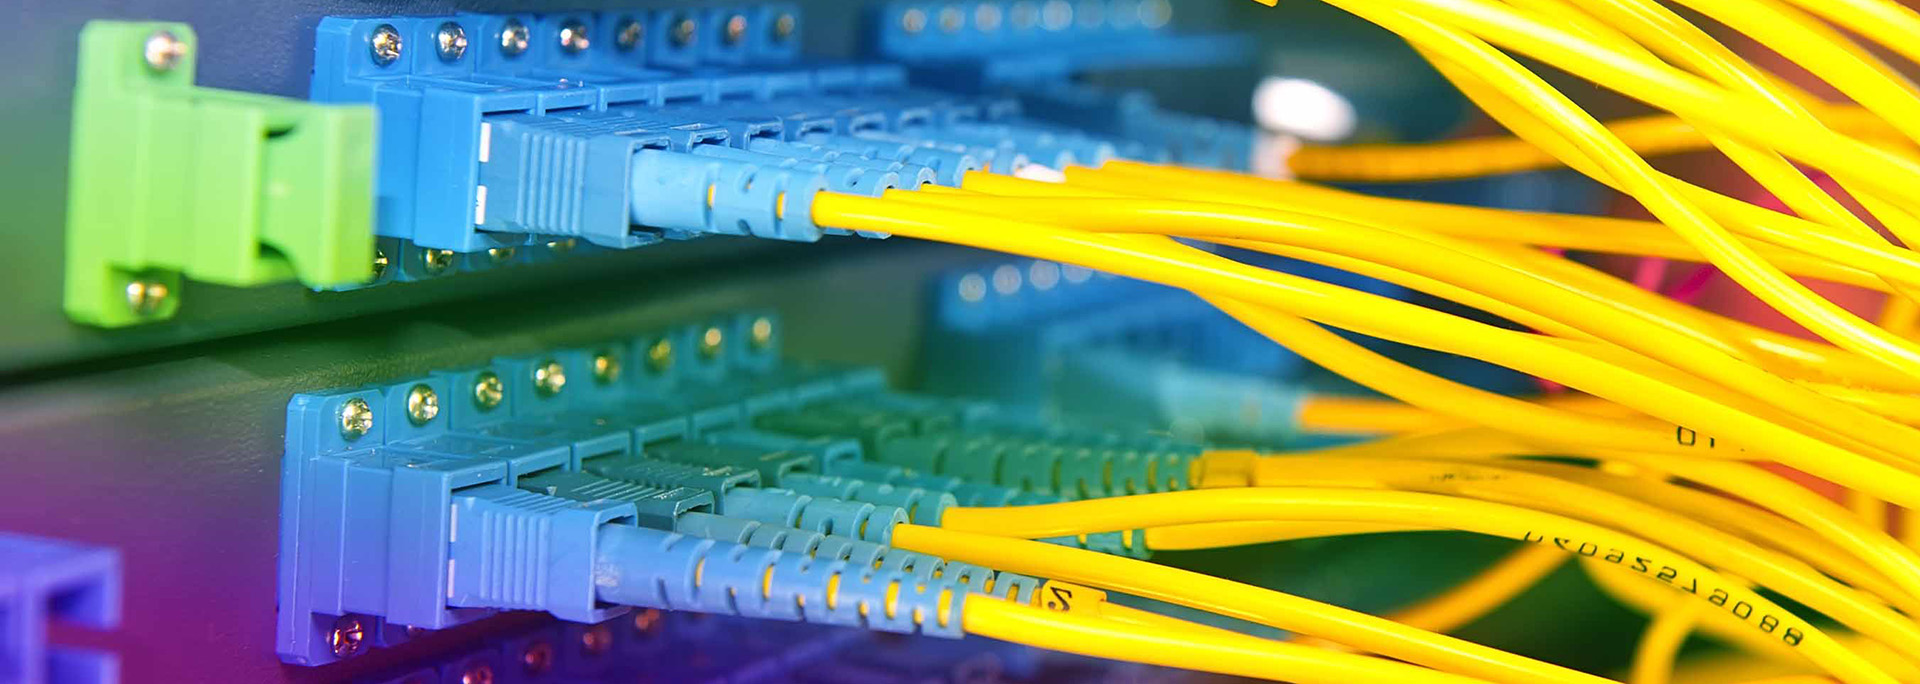 A series of colorful network cables extending from a router.